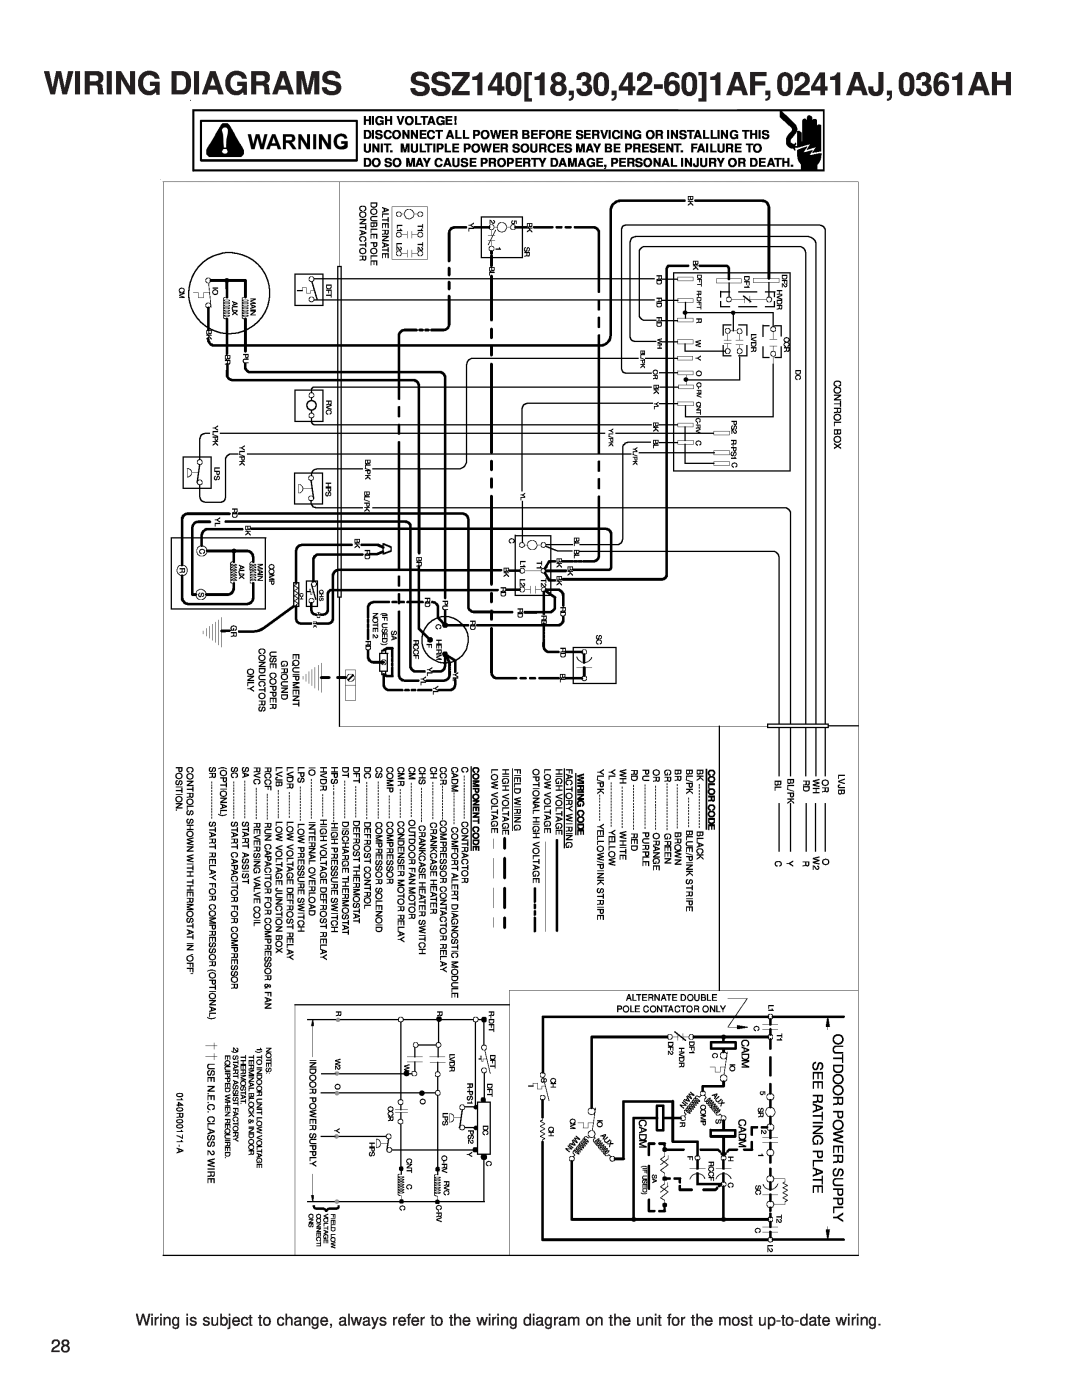 Goodman Mfg SSZ 14 SEER 0241AJ, 0361AH, 601AF, WIRING DIAGRAMS SSZ14018,30,42, to-datewiring, on the unit for the most up 